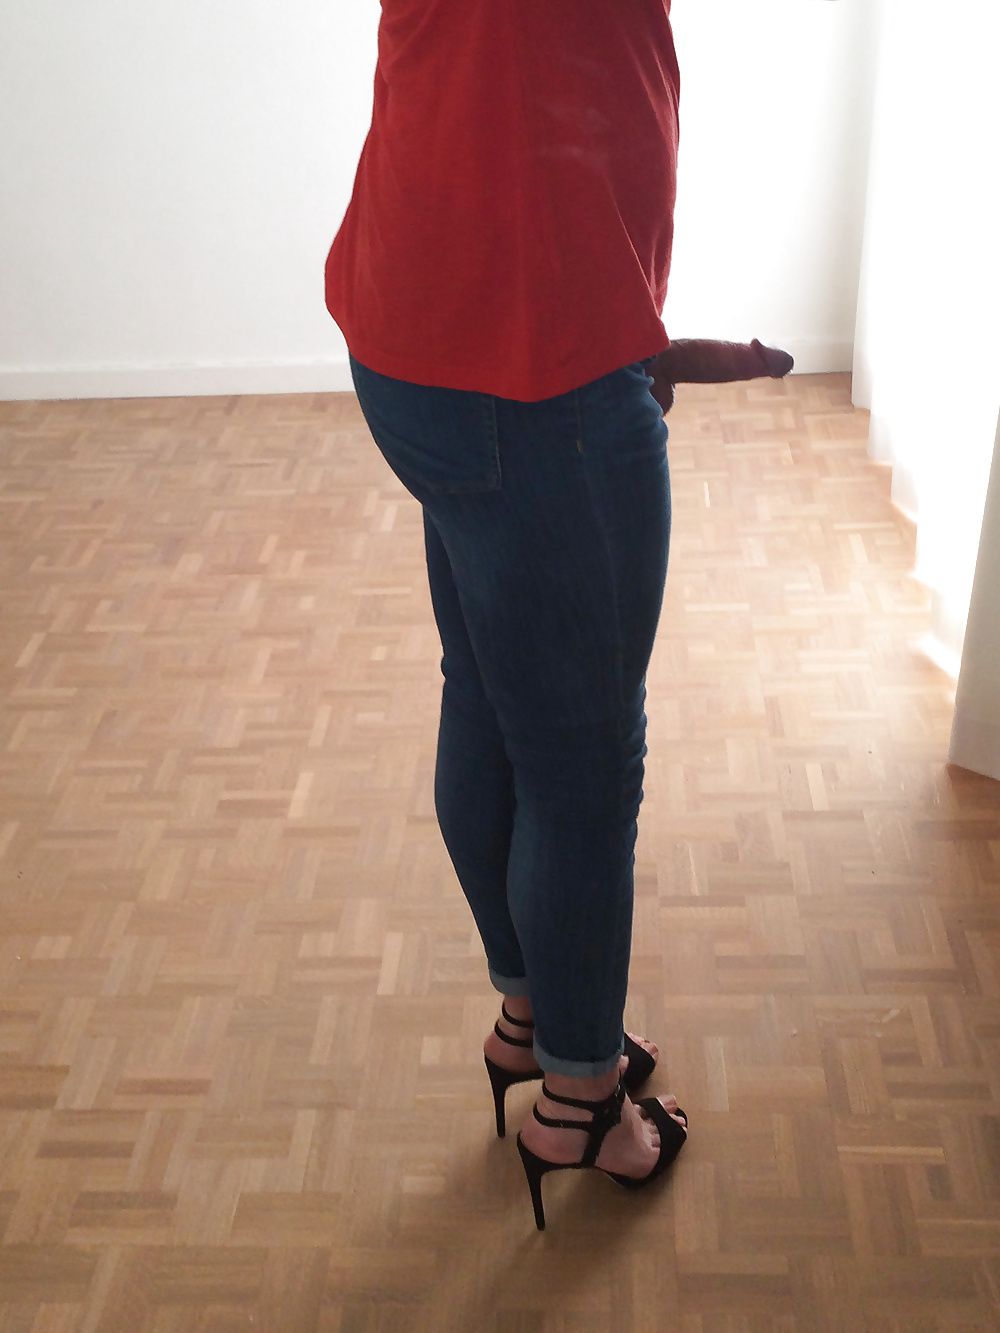 Jeans & red top, whale tail :) #13